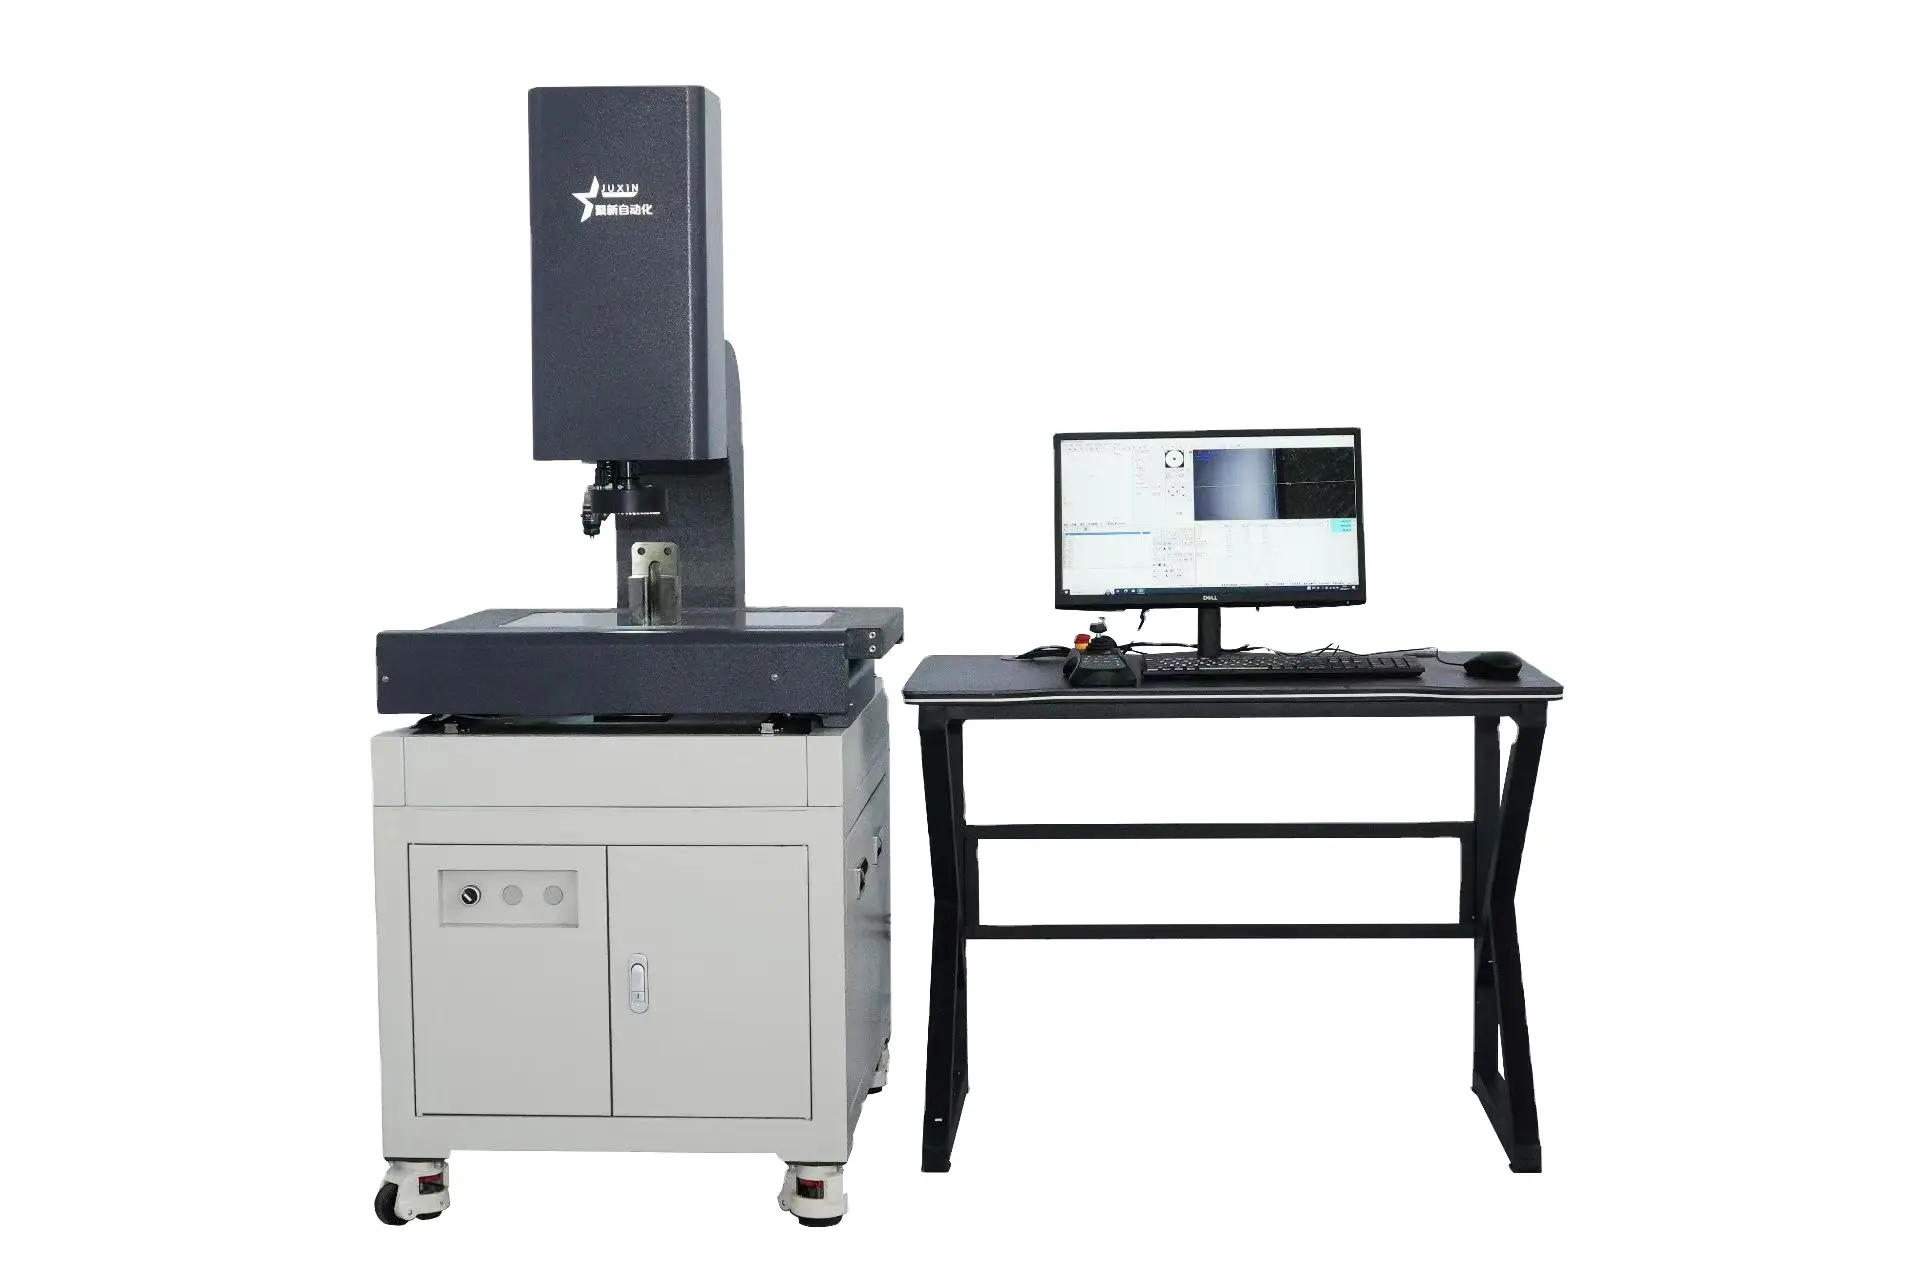 FVS-2020Z High precision and convenient one click flash tester